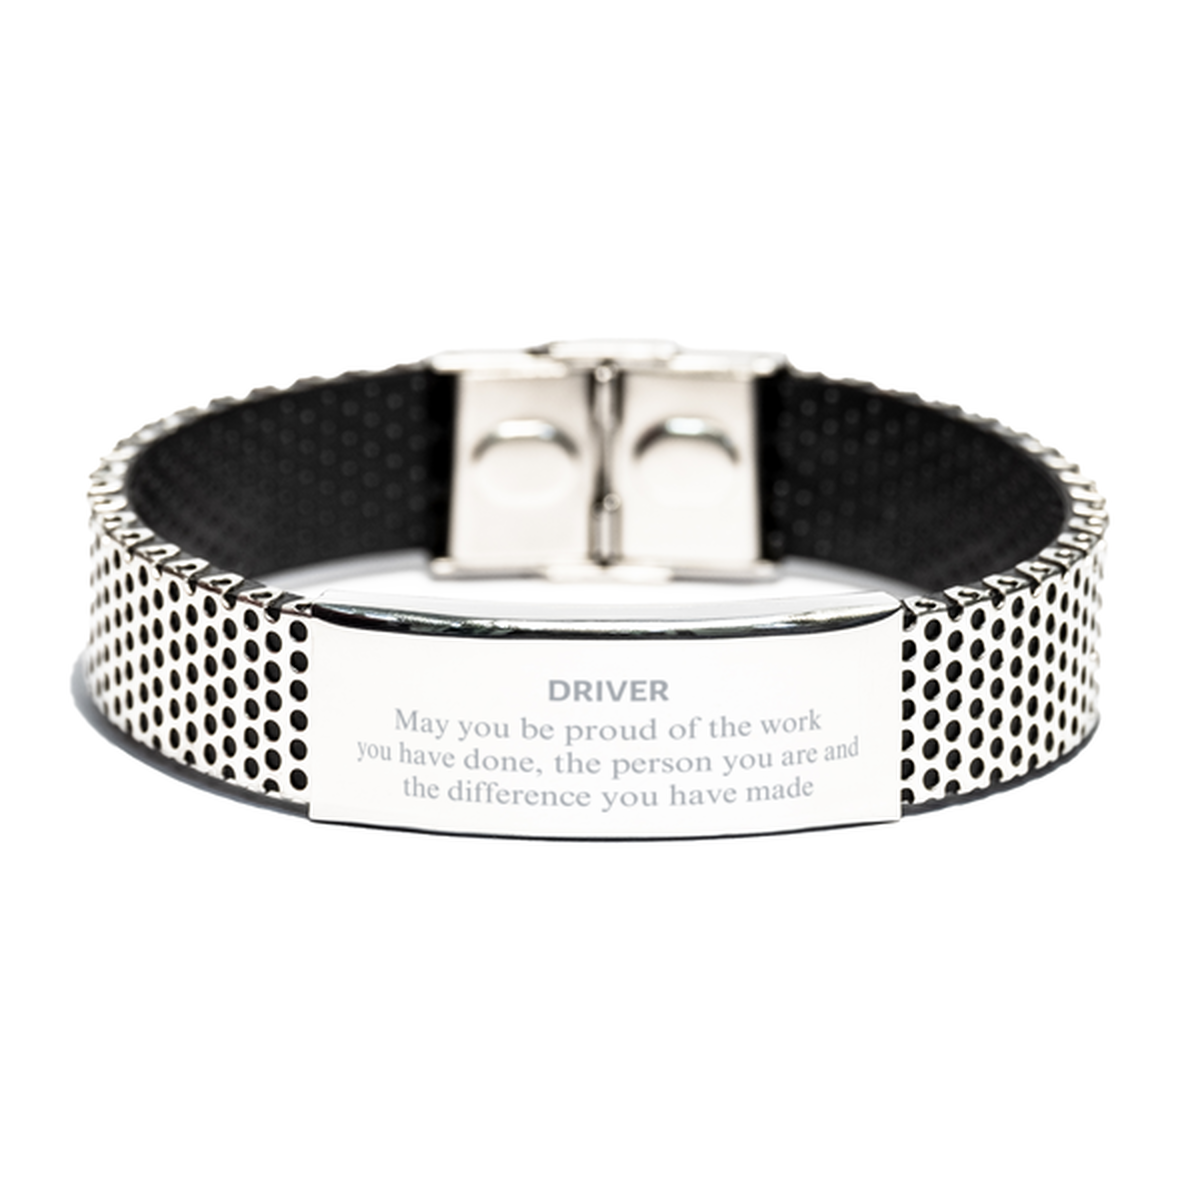 Driver May you be proud of the work you have done, Retirement Driver Stainless Steel Bracelet for Colleague Appreciation Gifts Amazing for Driver